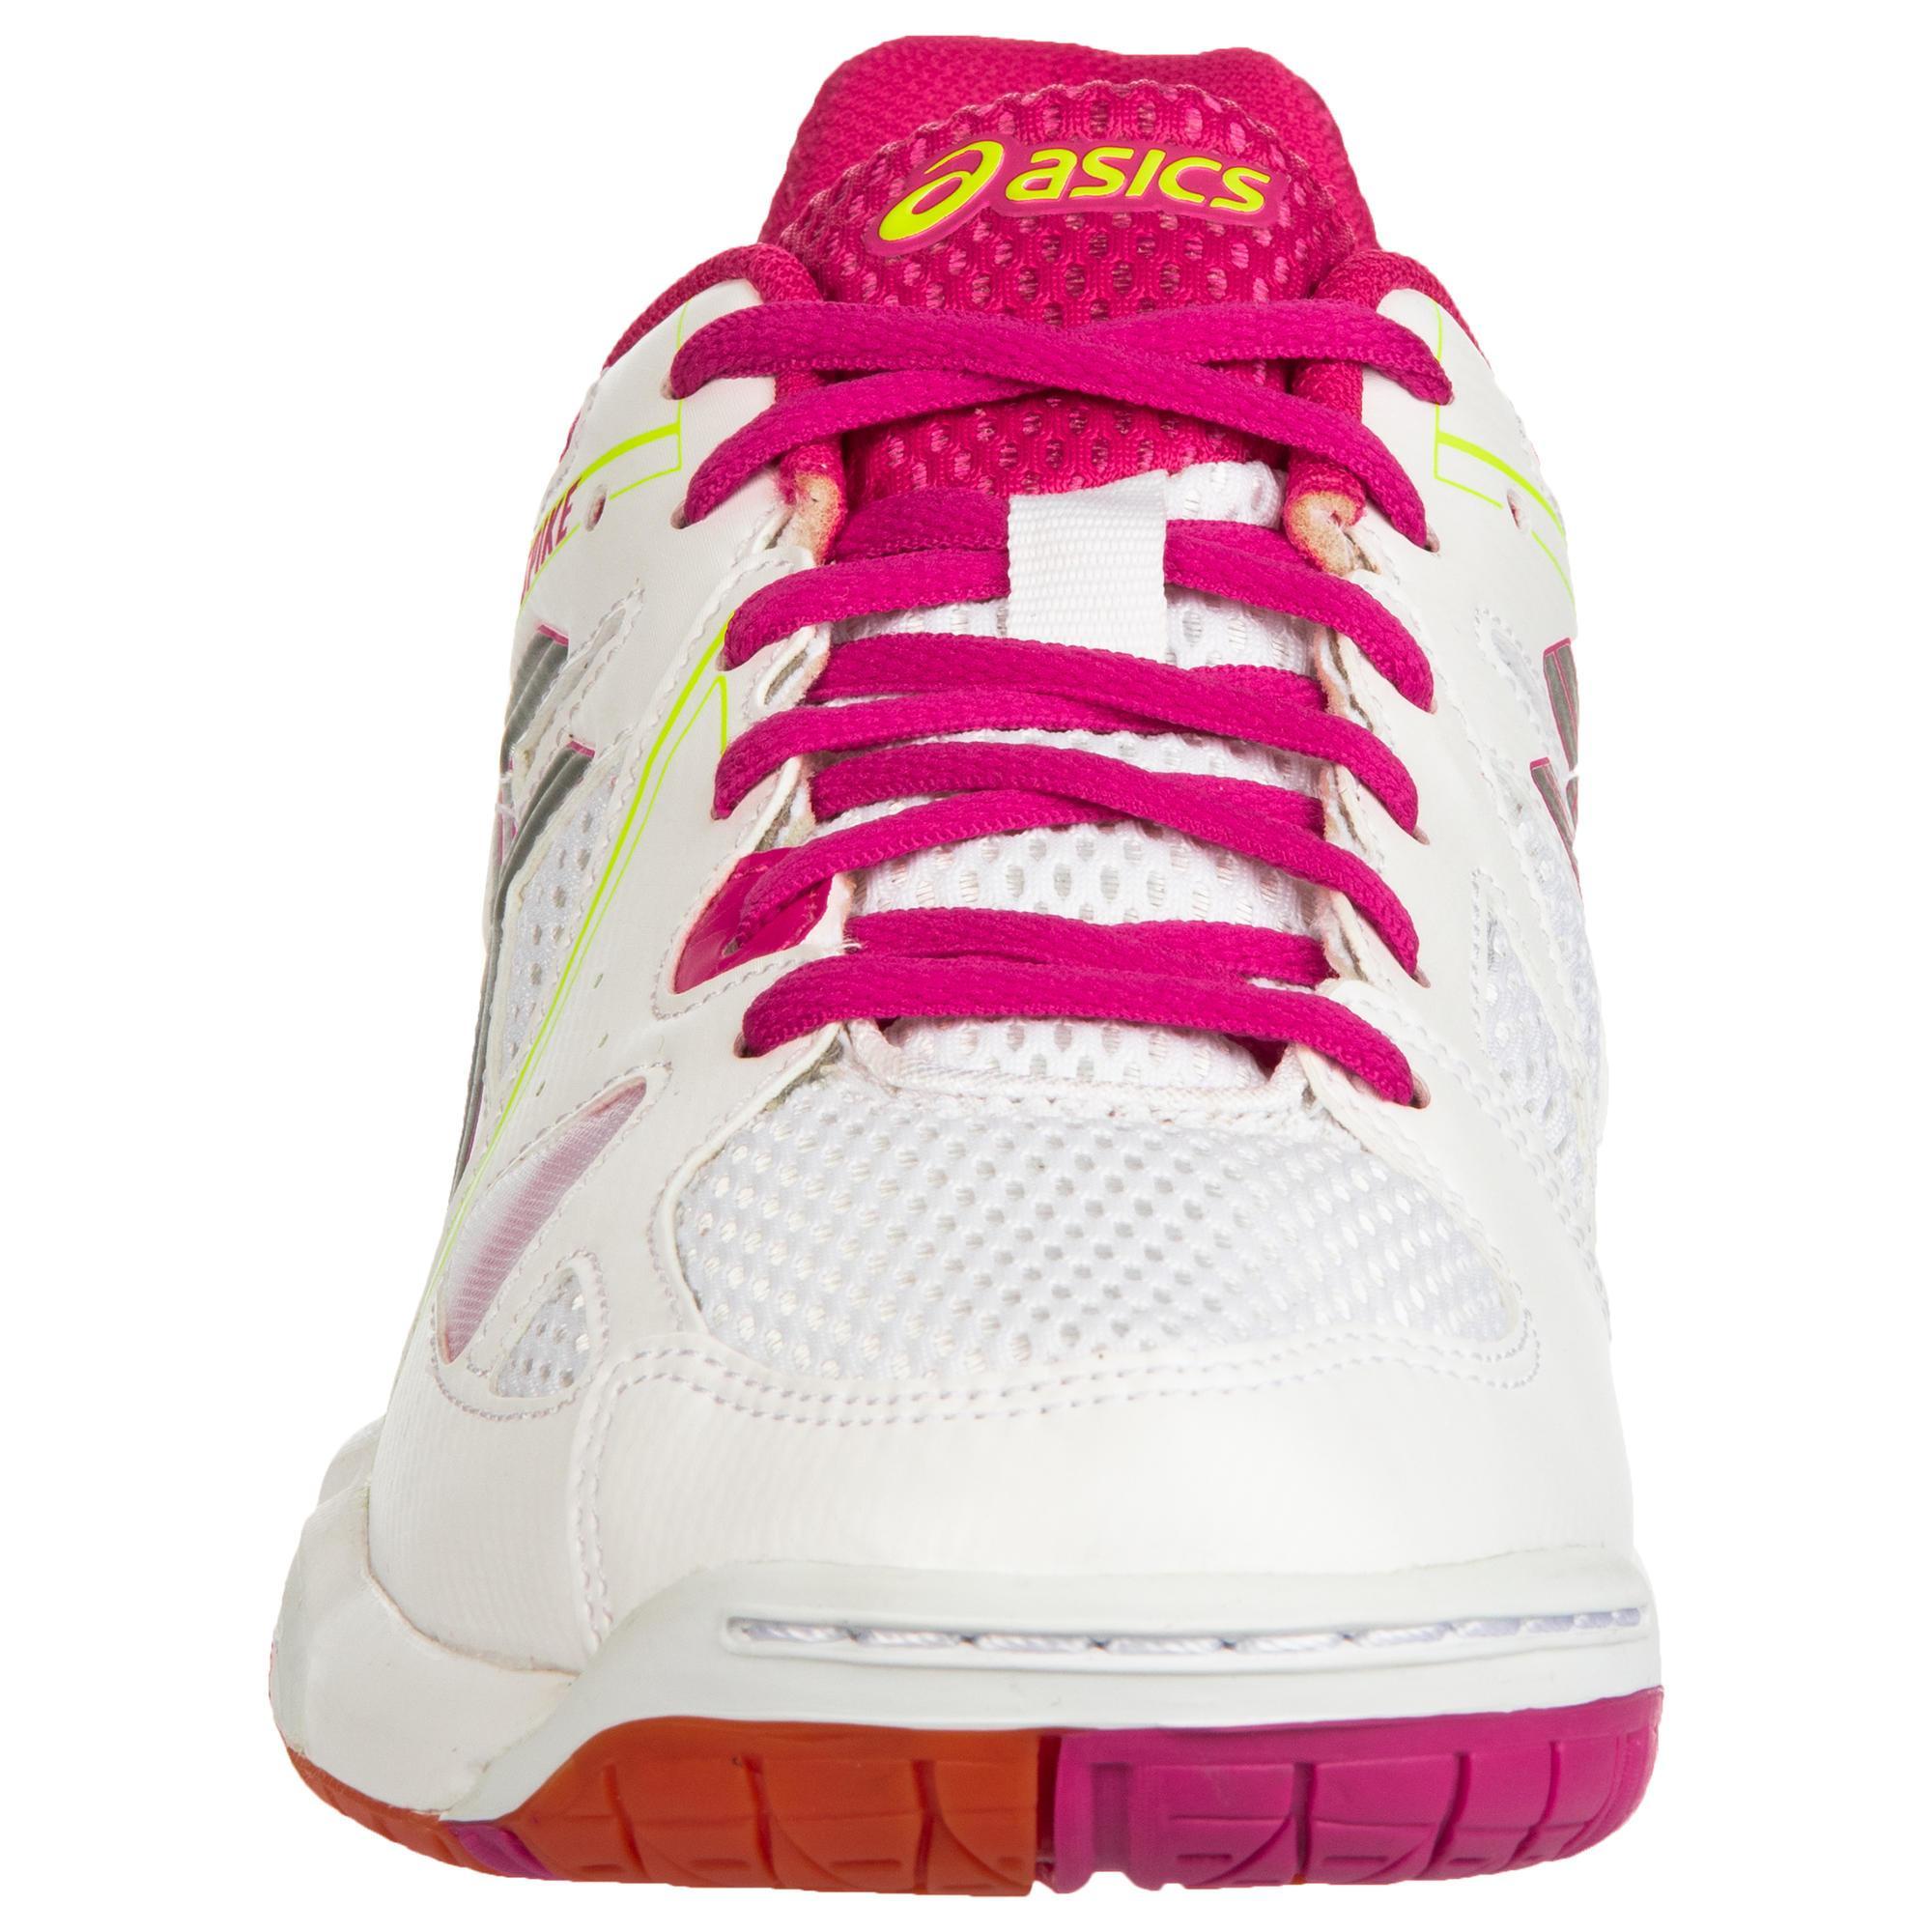 Volleyball Shoes - White/Pink ASICS 